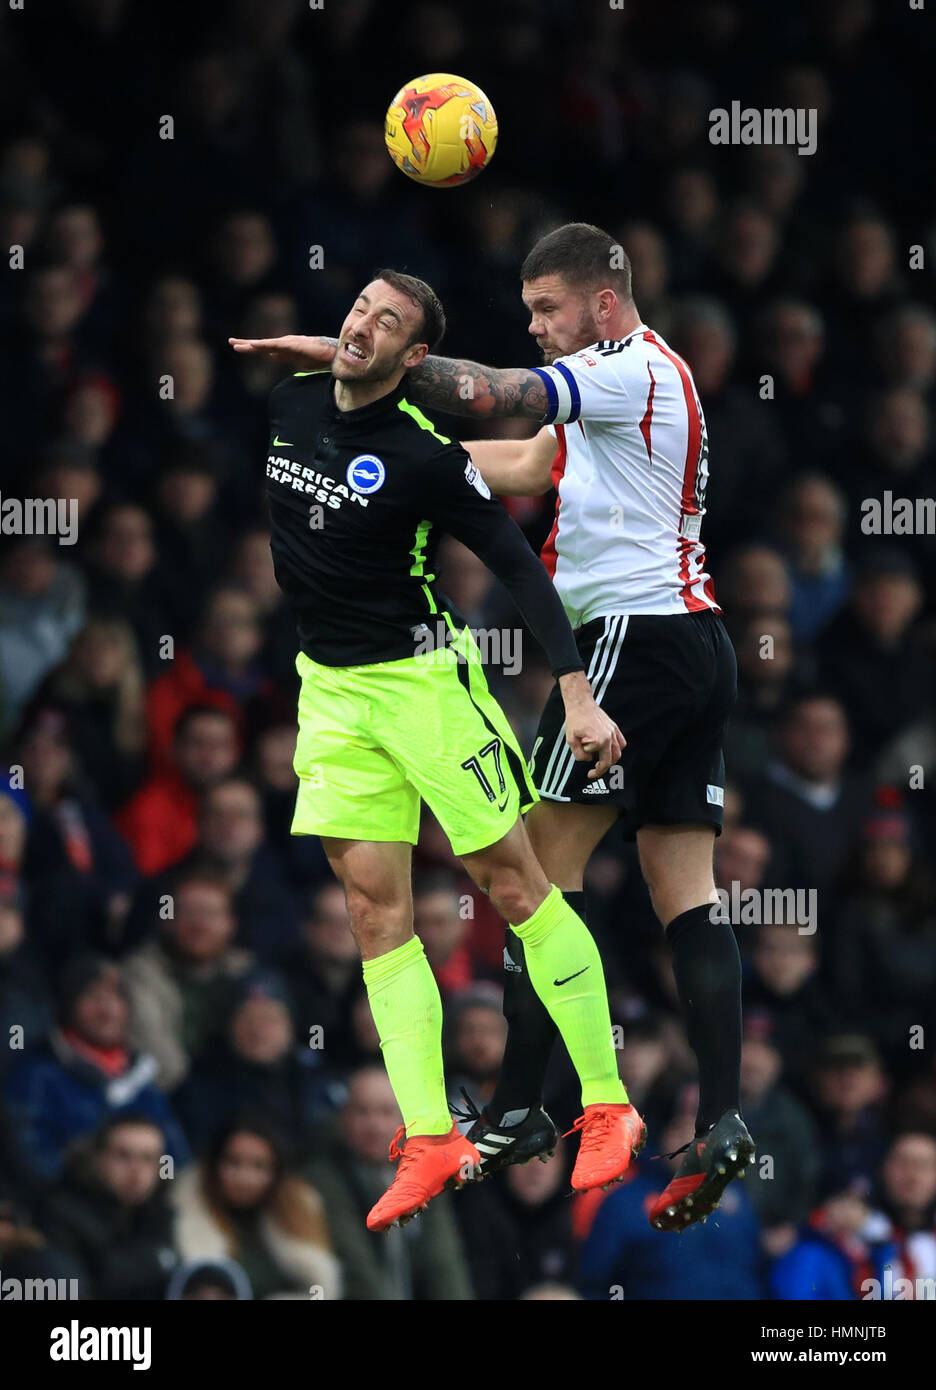 Brighton & Hove Albion's Glenn Murra (left) battles for possession of the ball in the air with Brentford's Harlee Dean (right) during the Sky Bet Championship match at Griffin Park, London. Stock Photo